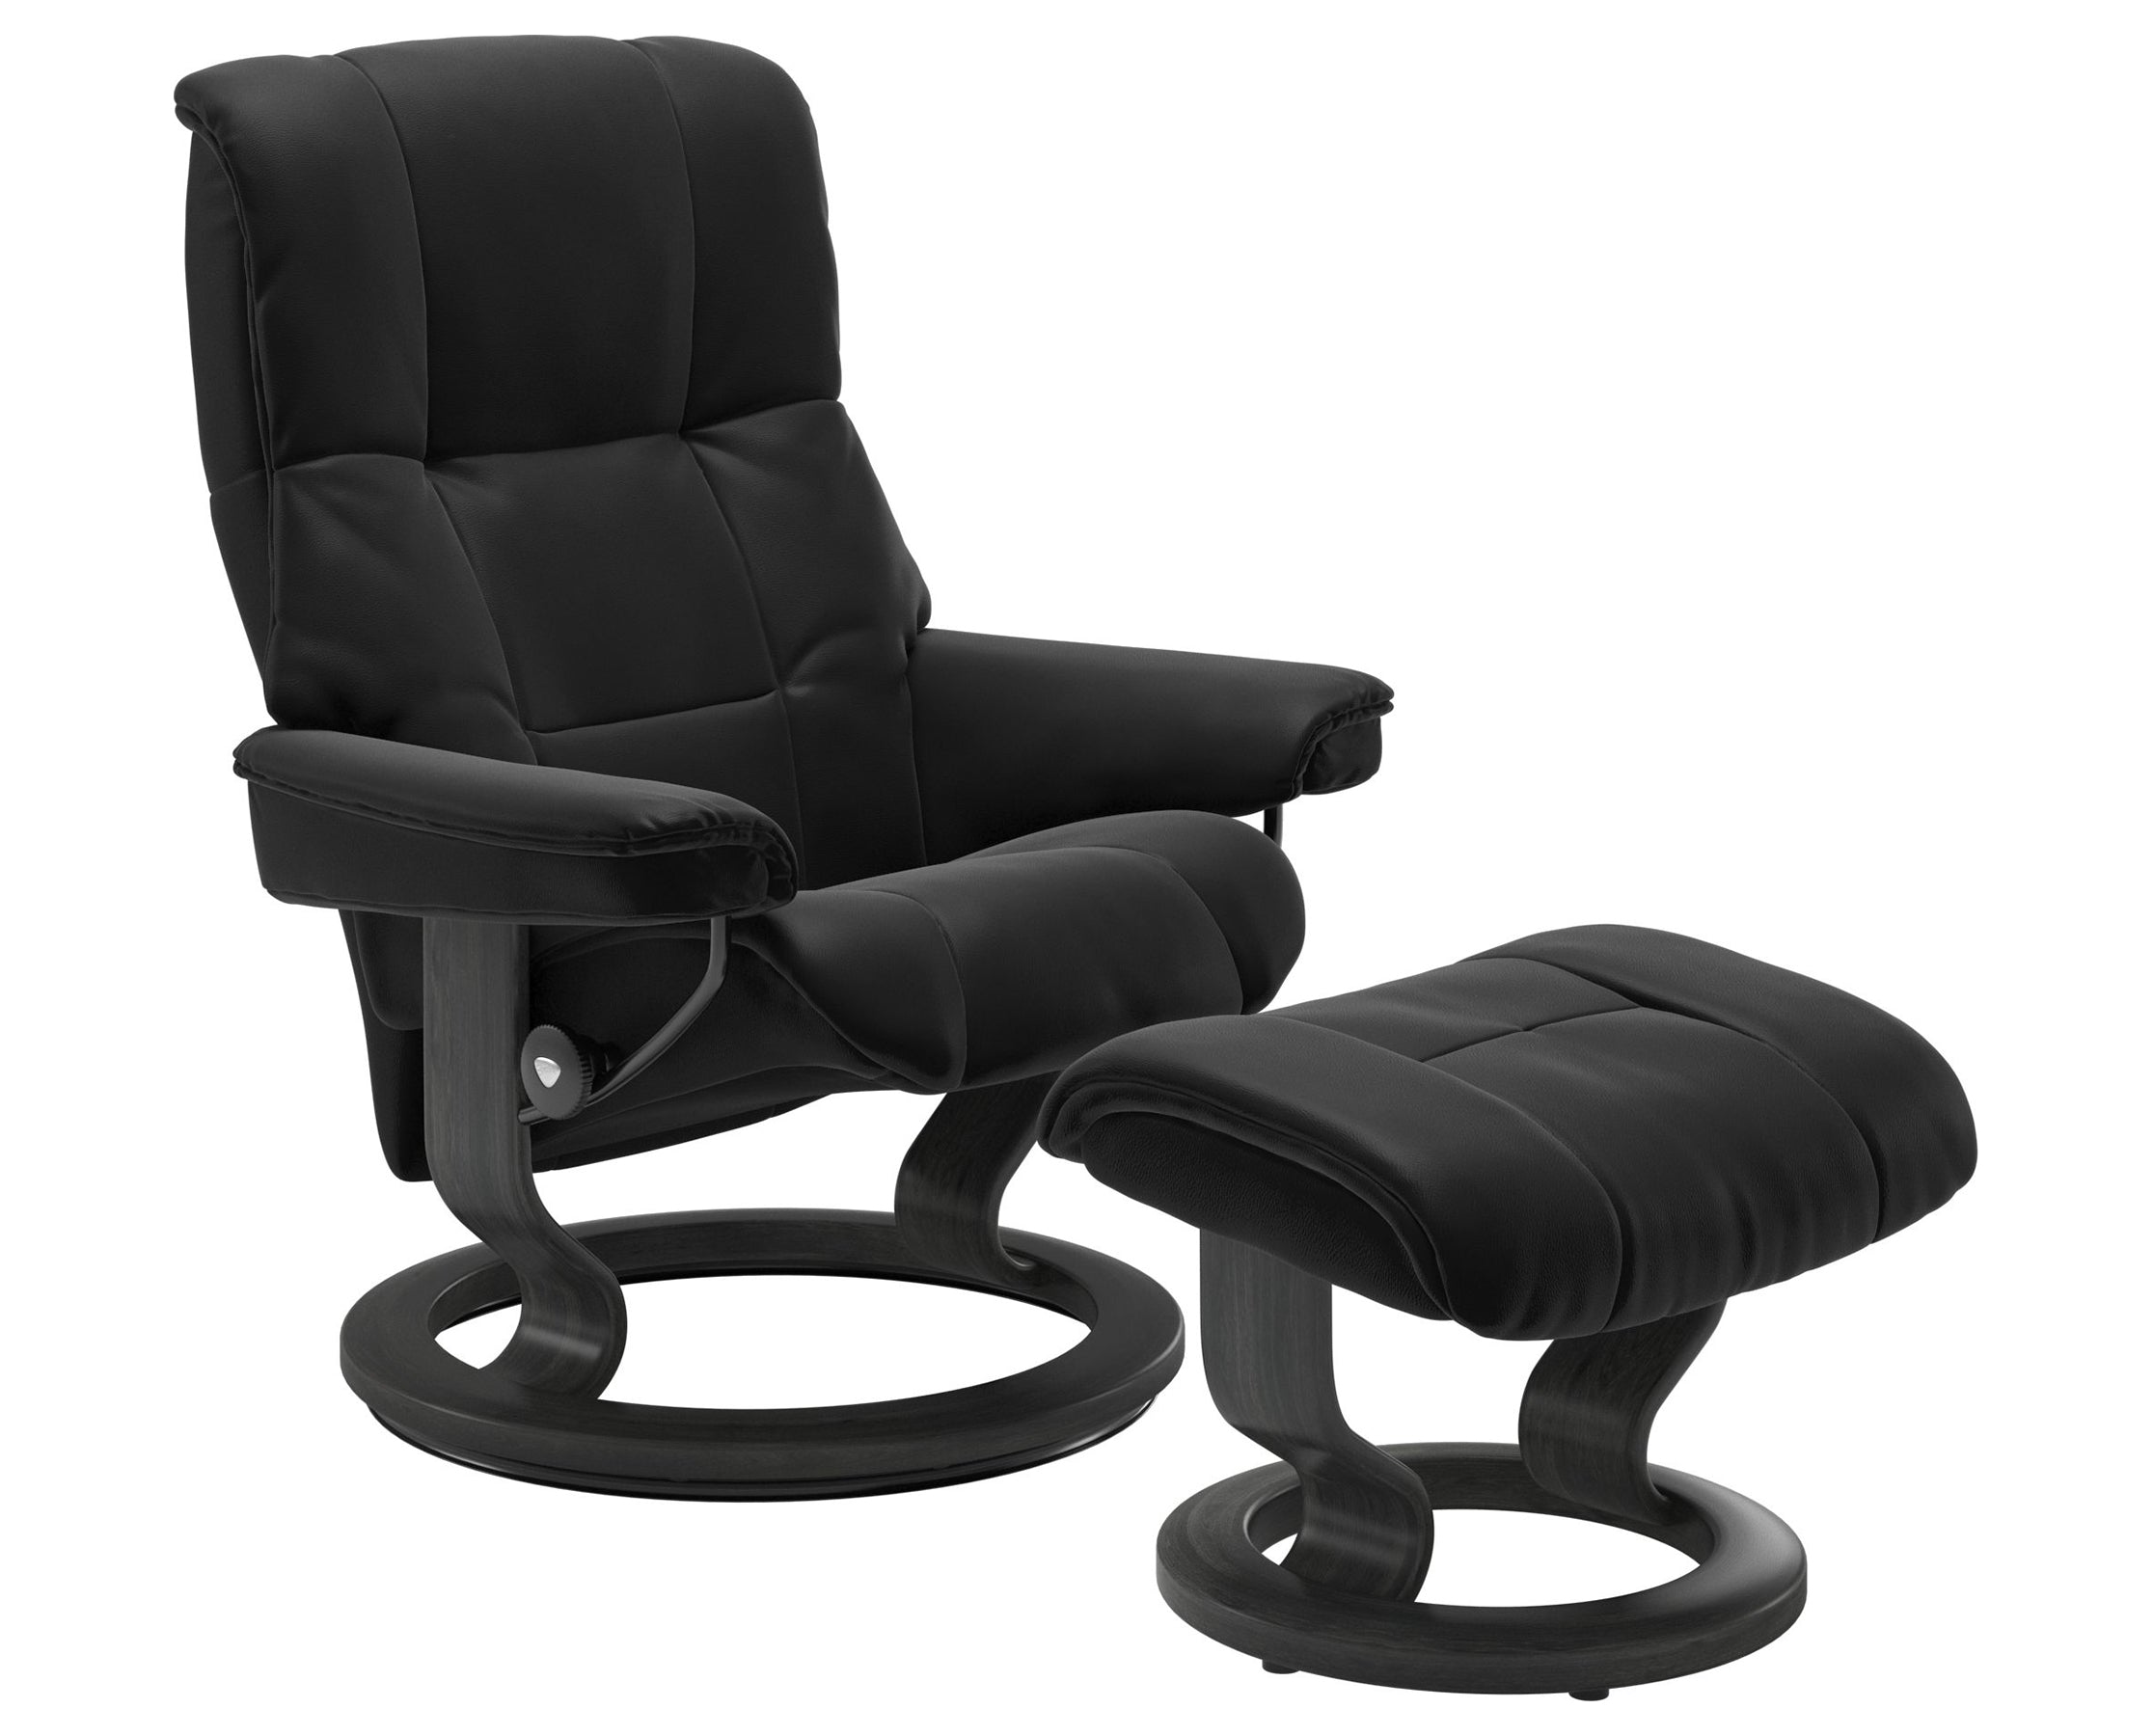 Paloma Leather Black S/M/L and Grey Base | Stressless Mayfair Classic Recliner | Valley Ridge Furniture